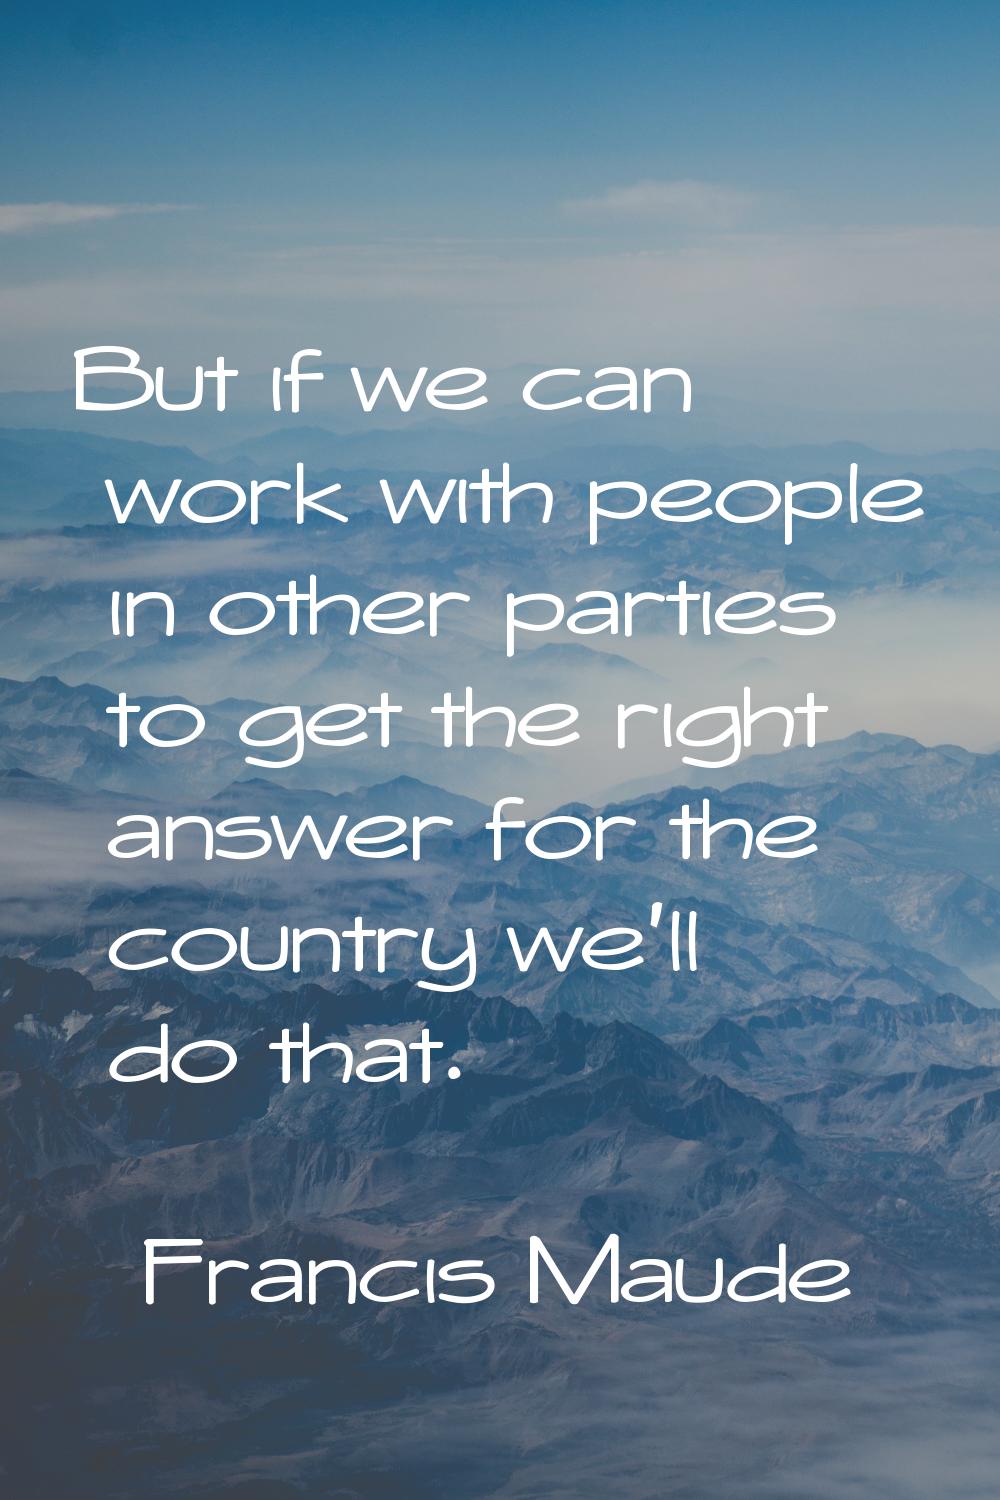 But if we can work with people in other parties to get the right answer for the country we'll do th